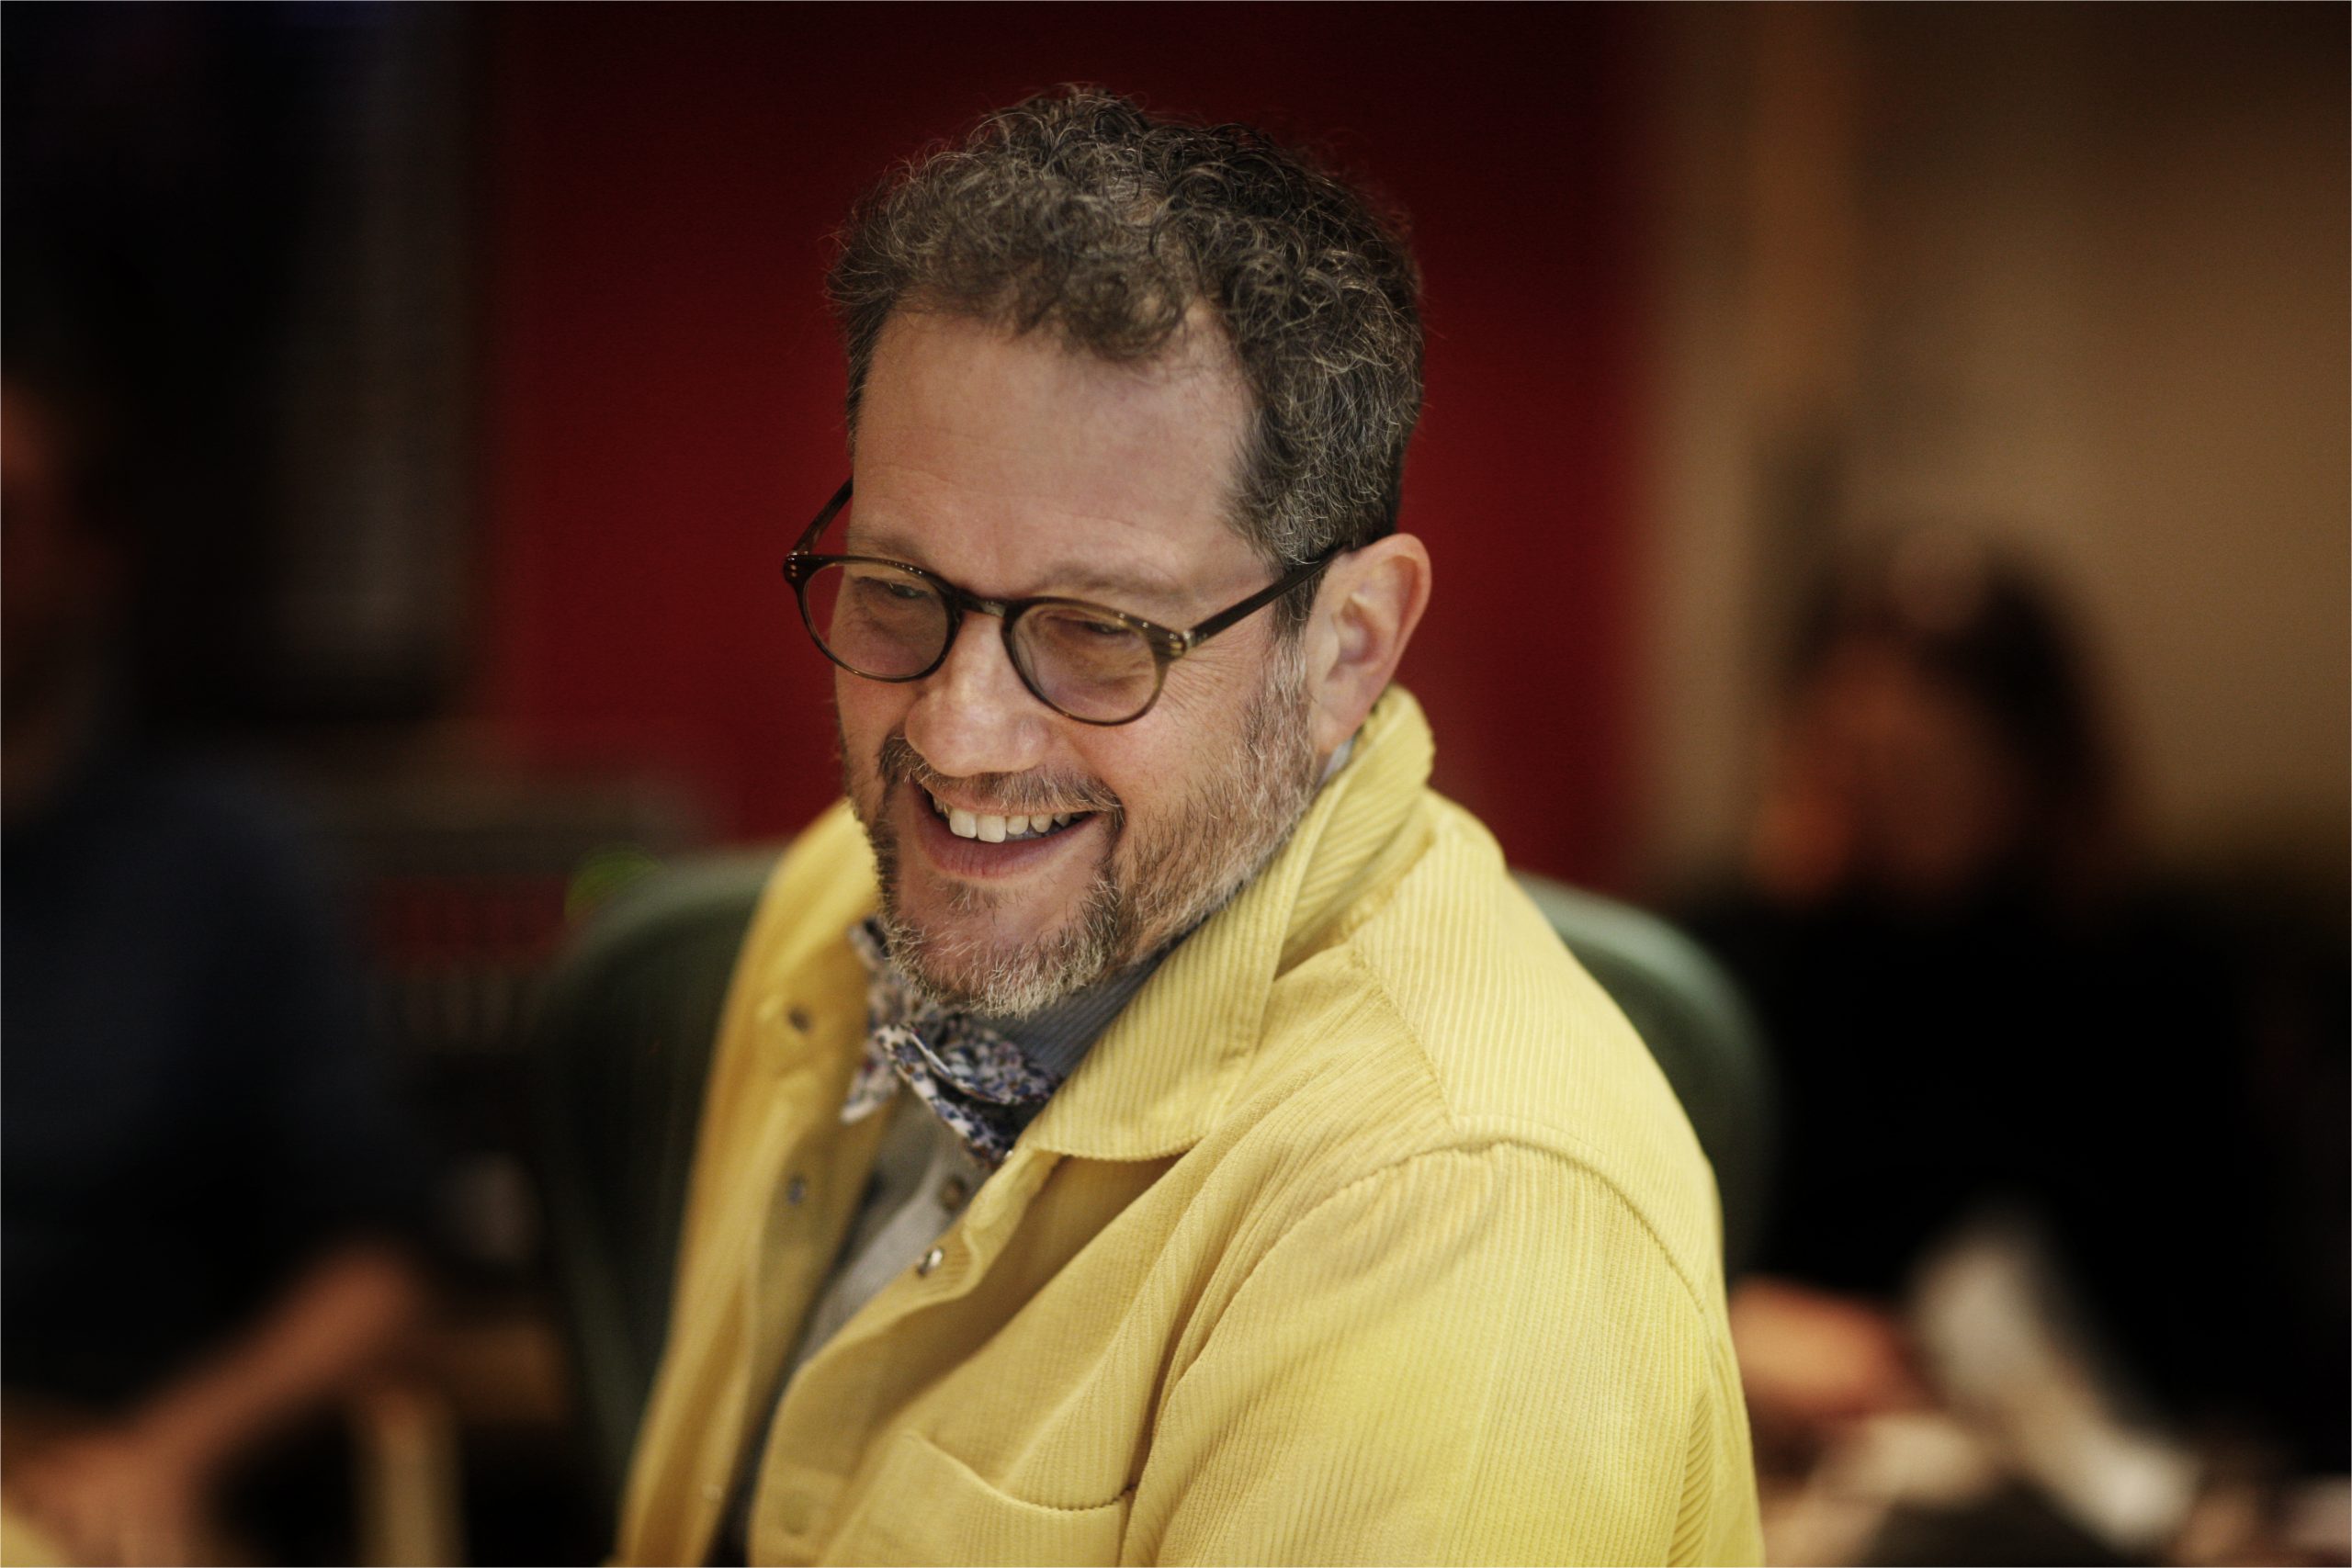 Society of the Snow Composer Michael Giacchino Crafts One Of His ...